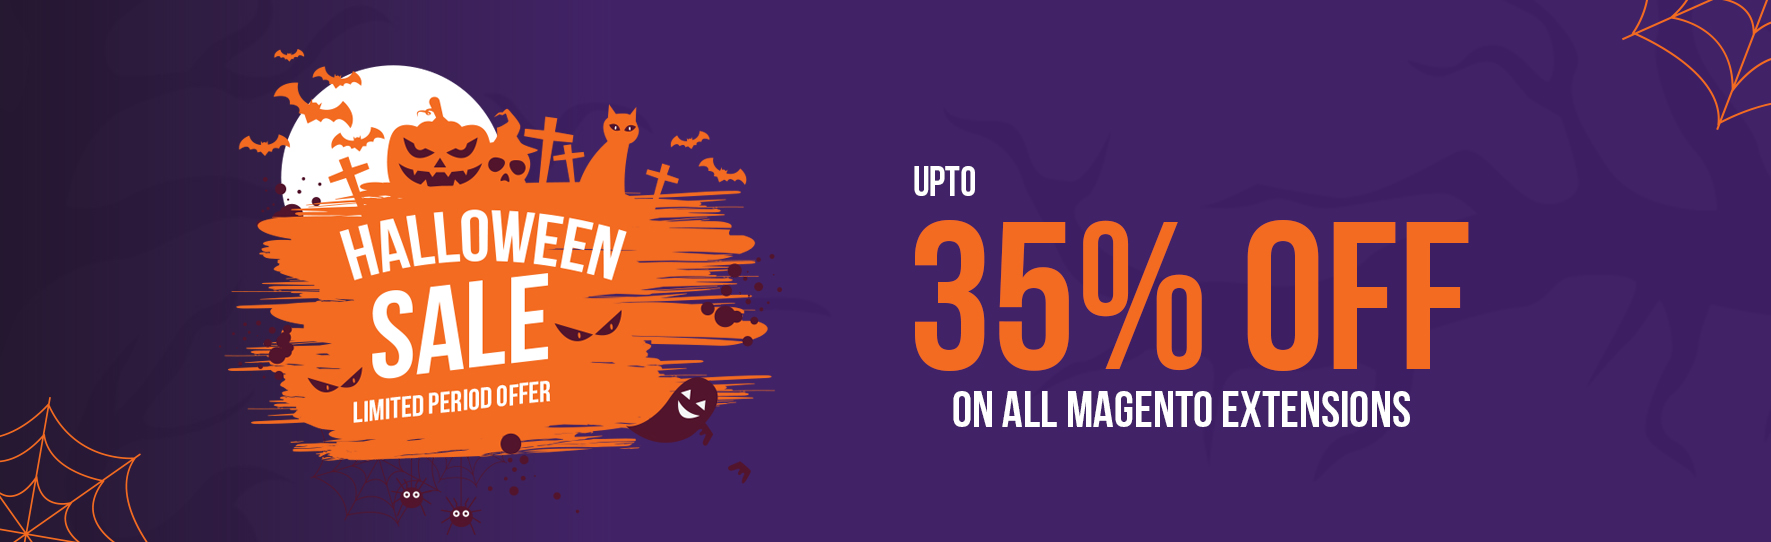 Halloween Sale 2018 on Magento Extensions by MageDelight